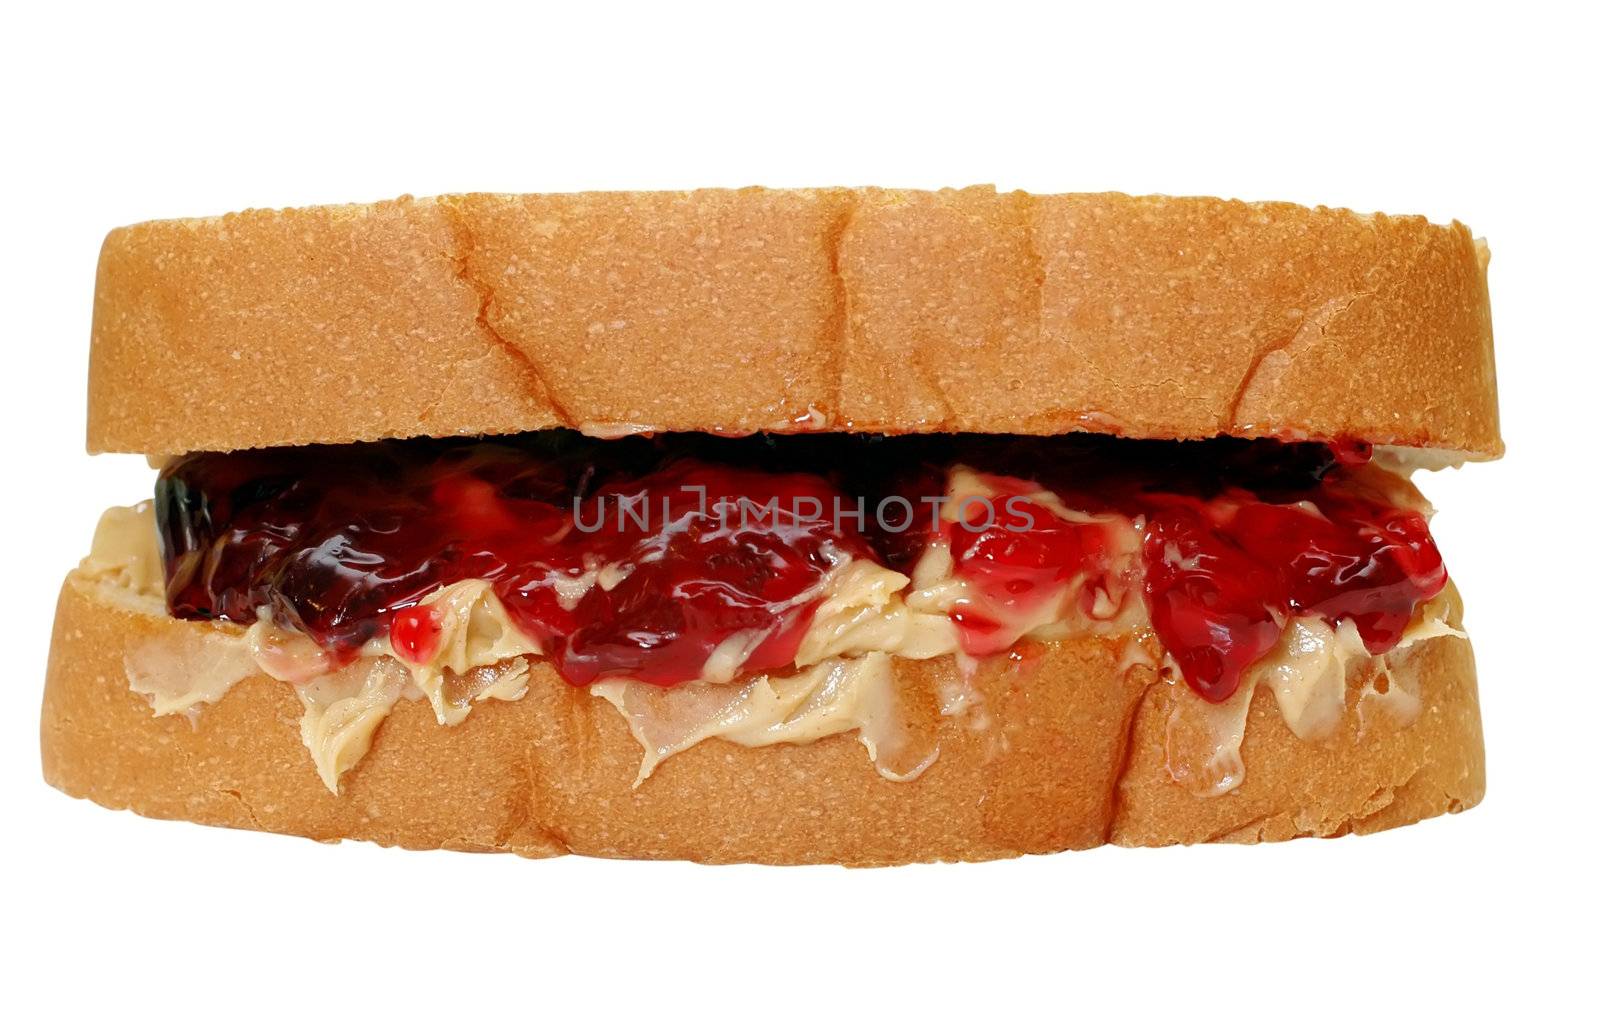 Peanut butter and jelly sandwich with clipping path.